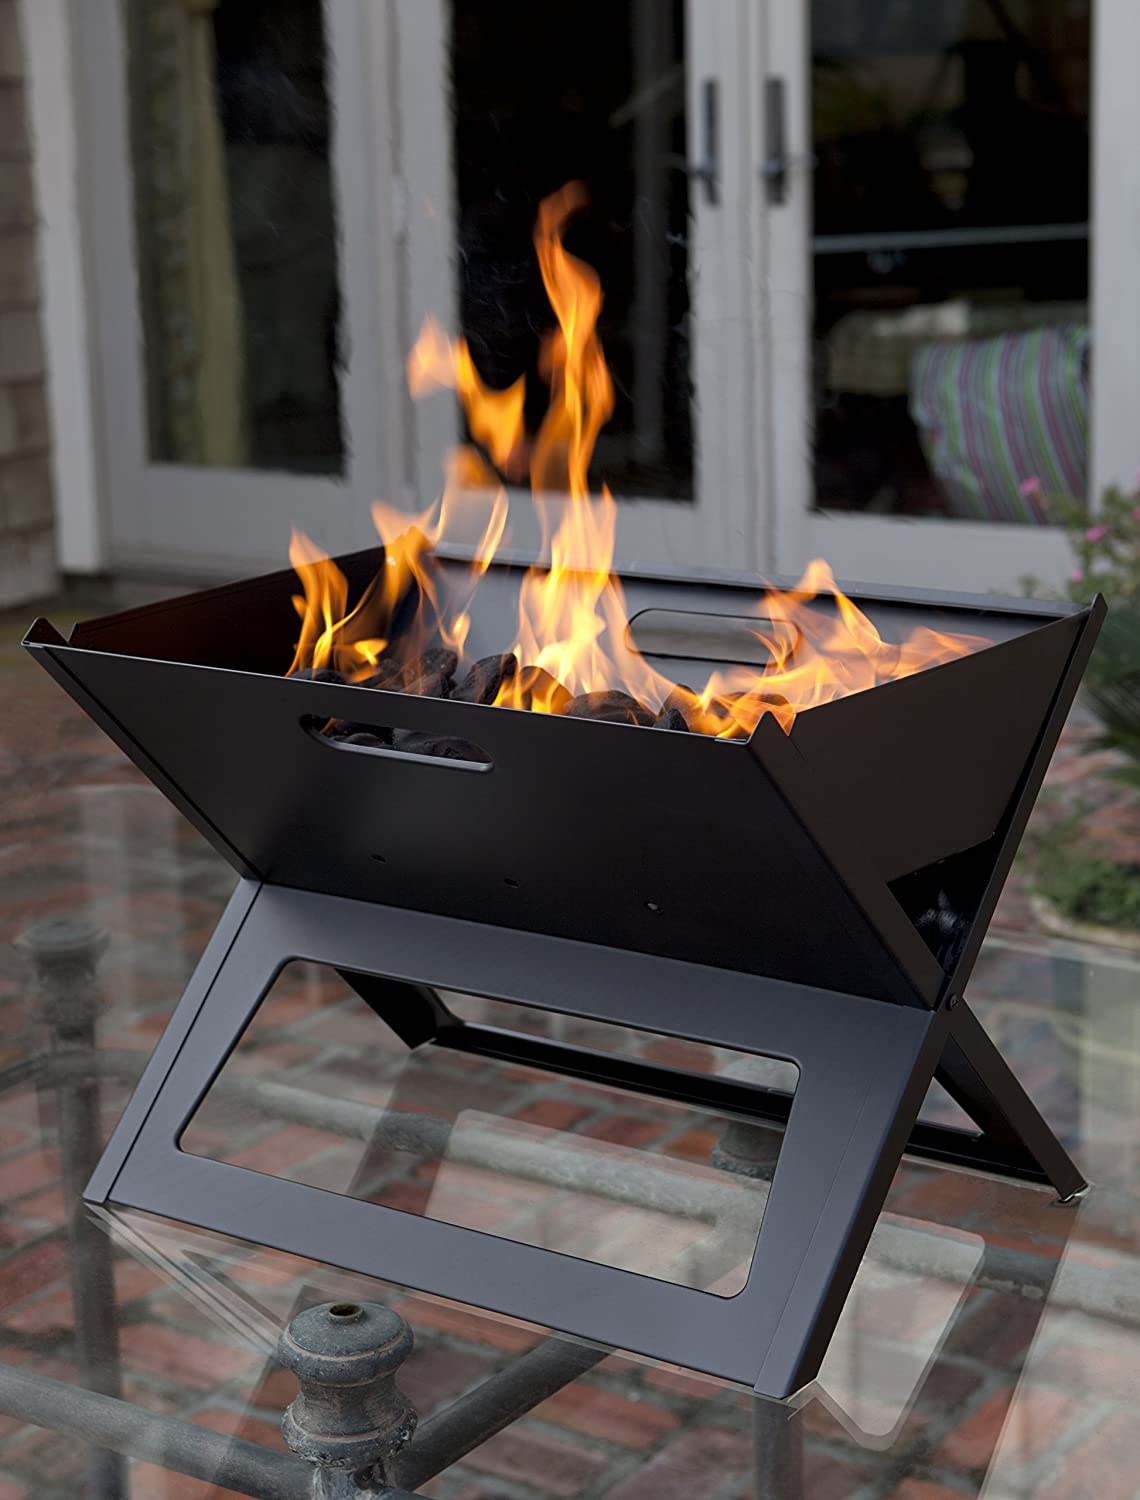 60508 Notebook BBQ Grill Instant Foldable and Easy Portability - Charcoal Grill